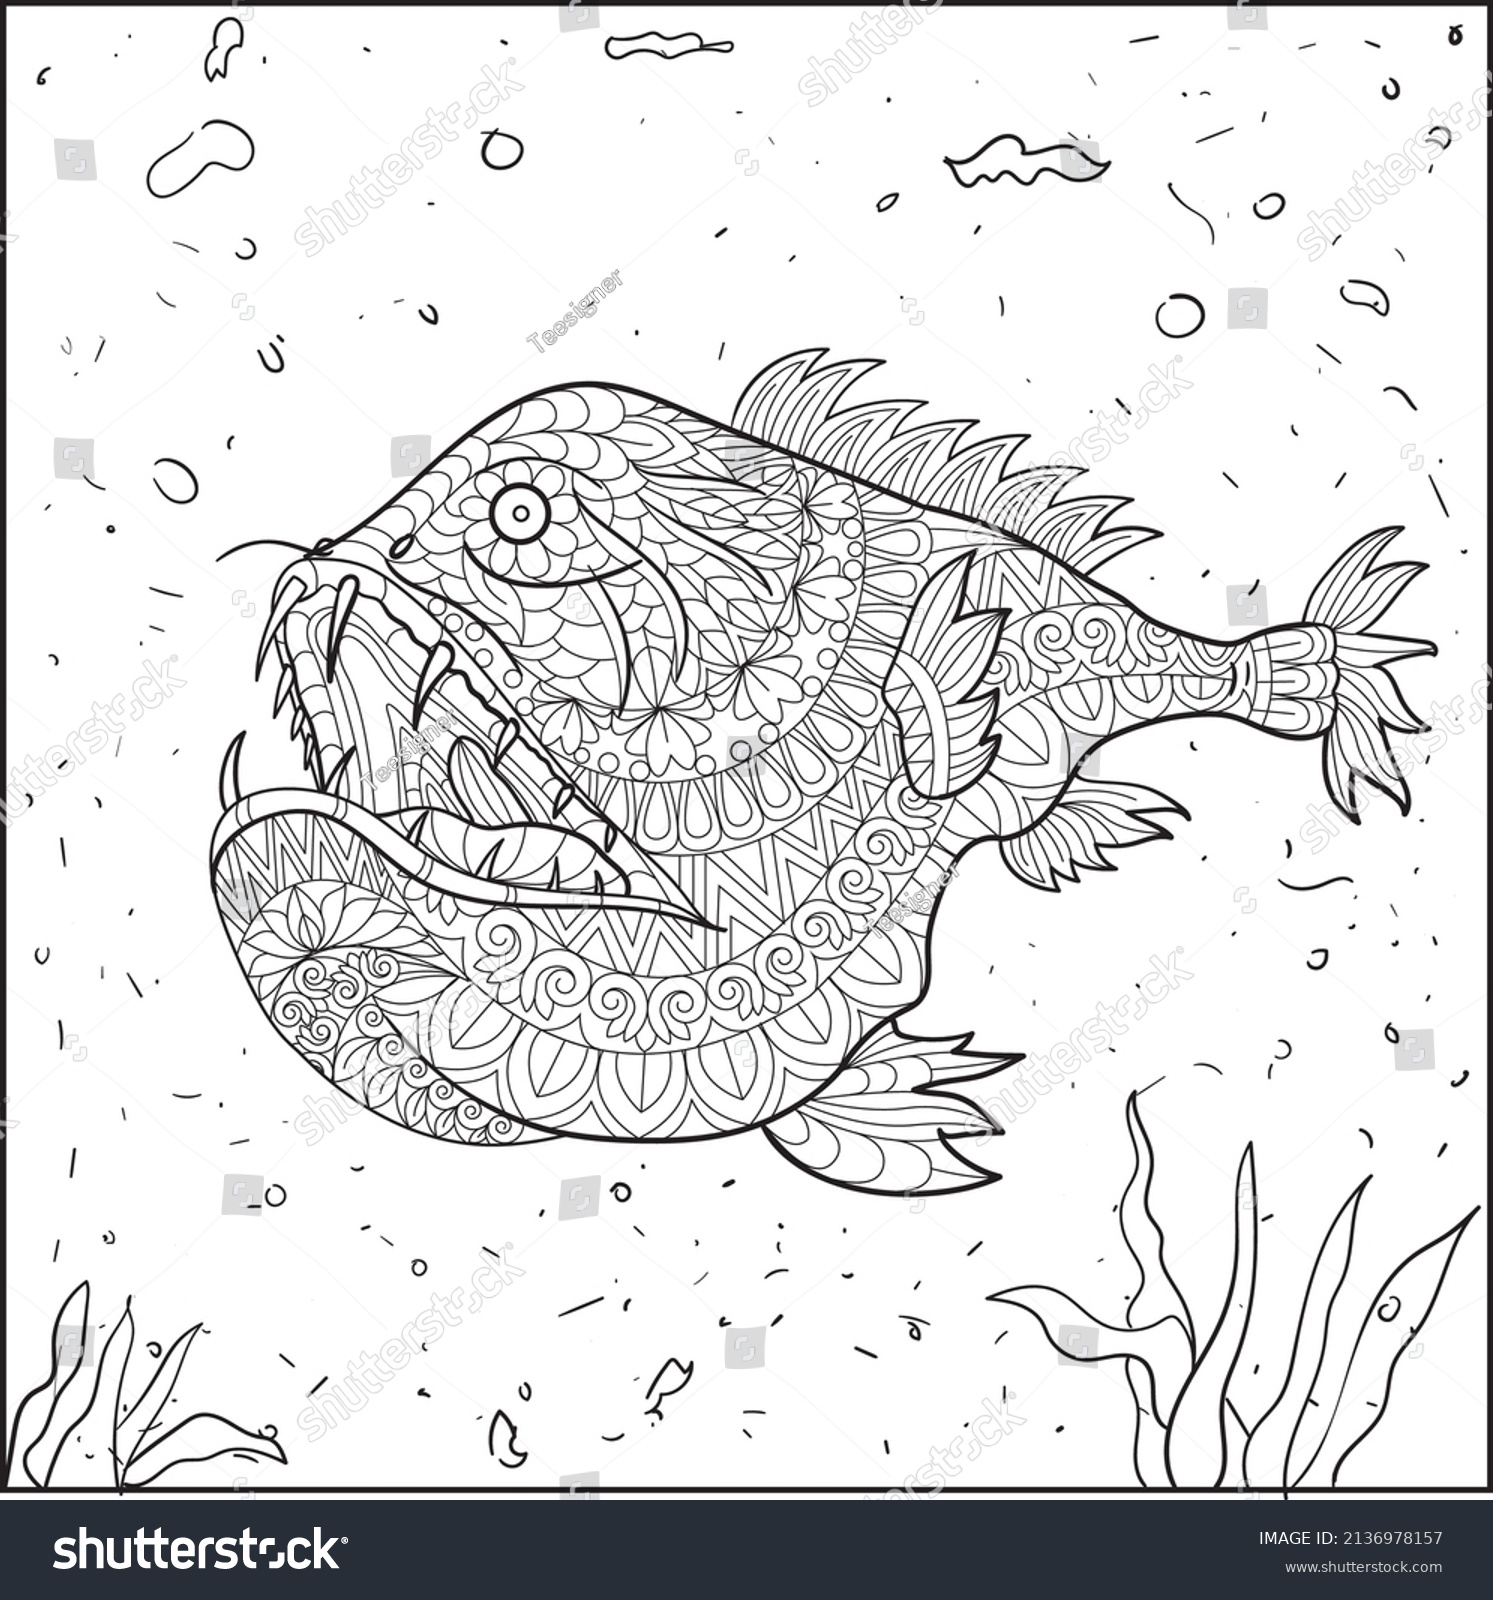 Sea Animal Doodle Art Coloring Page Stock Vector (Royalty Free